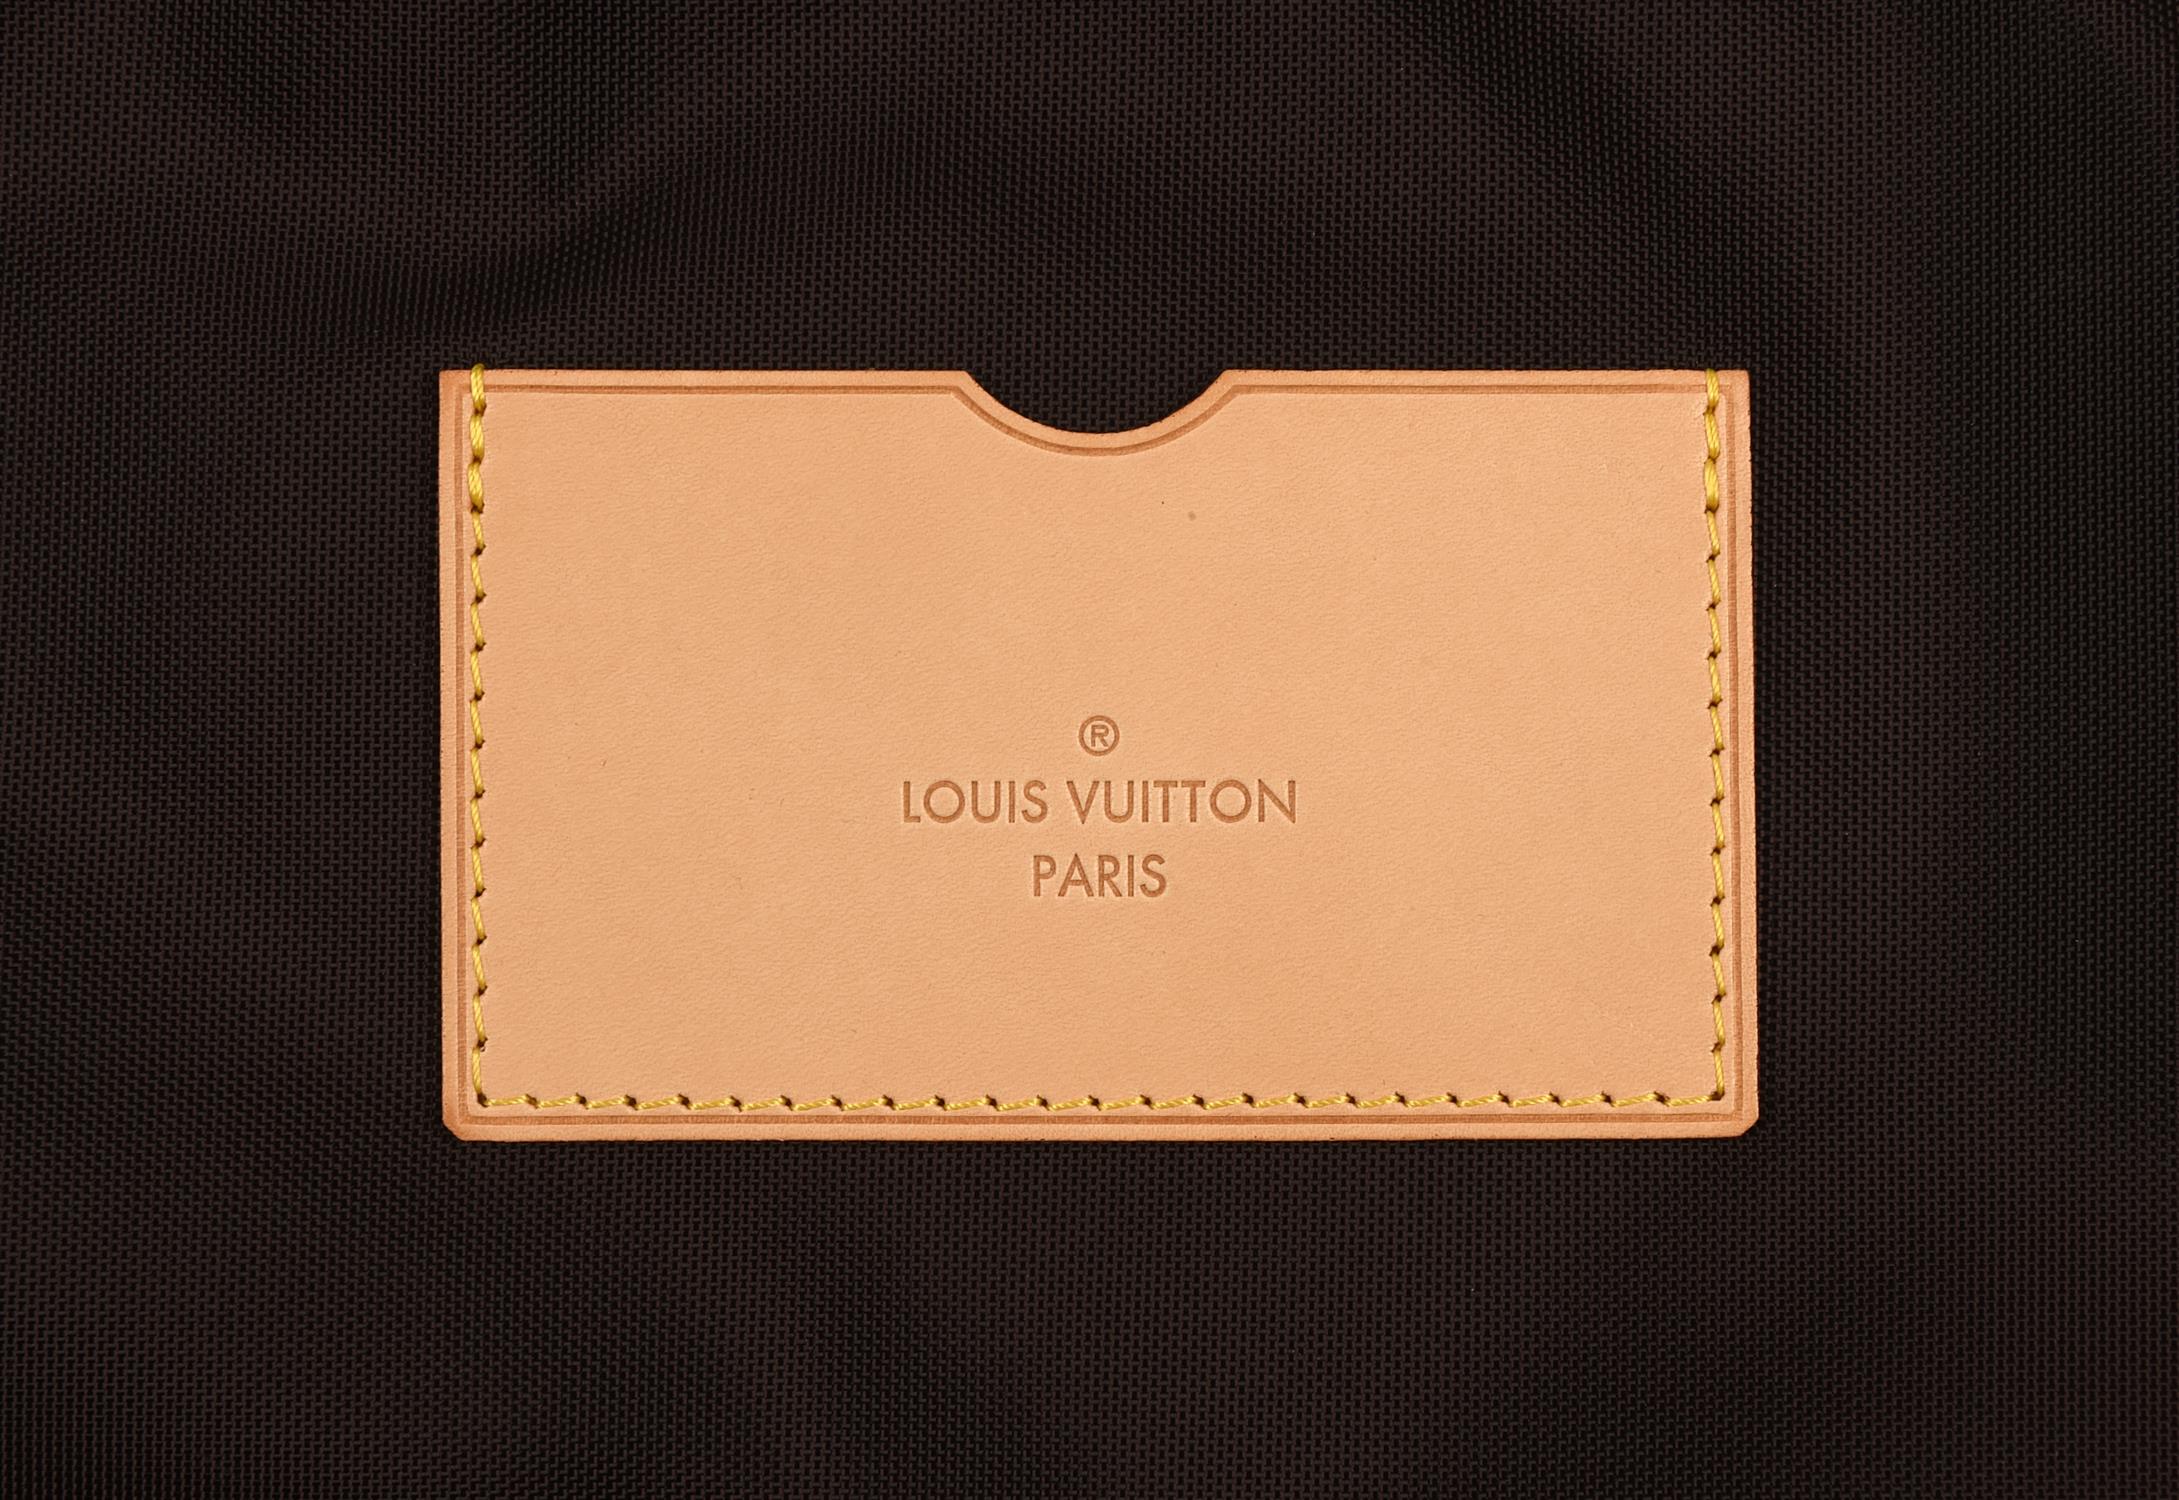 LOUIS VUITTON burgundy Vernis varnished leather PEGASE pull-a-long cabin travel bag with protective - Image 6 of 8